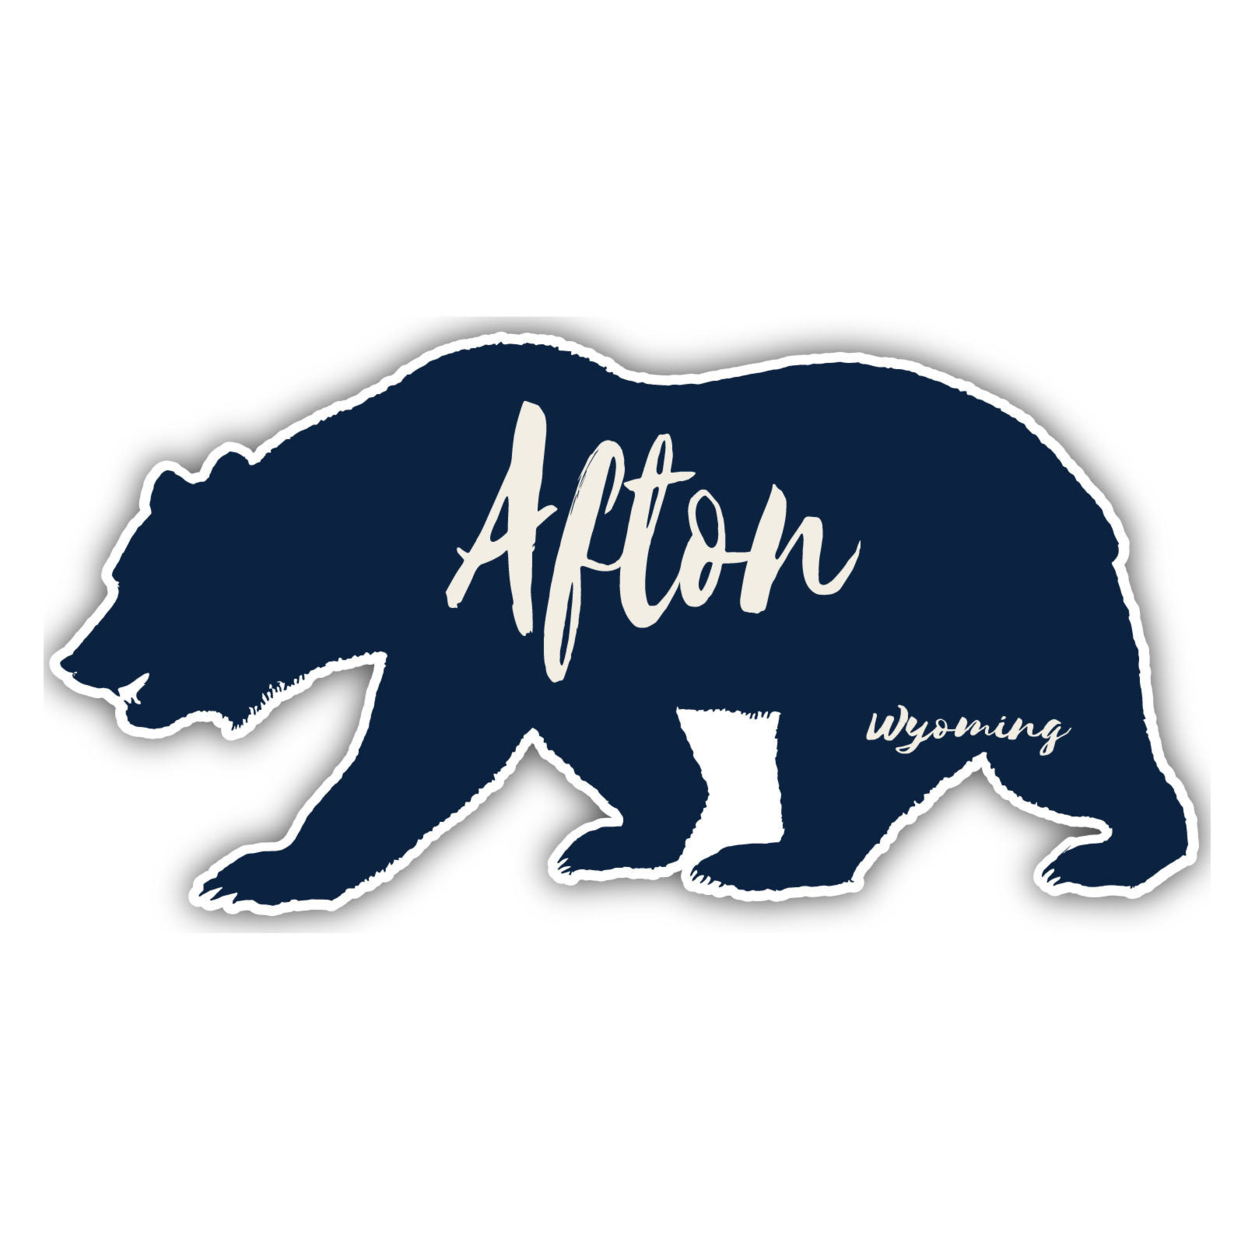 Afton Wyoming Souvenir Decorative Stickers (Choose Theme And Size) - 4-Pack, 2-Inch, Bear